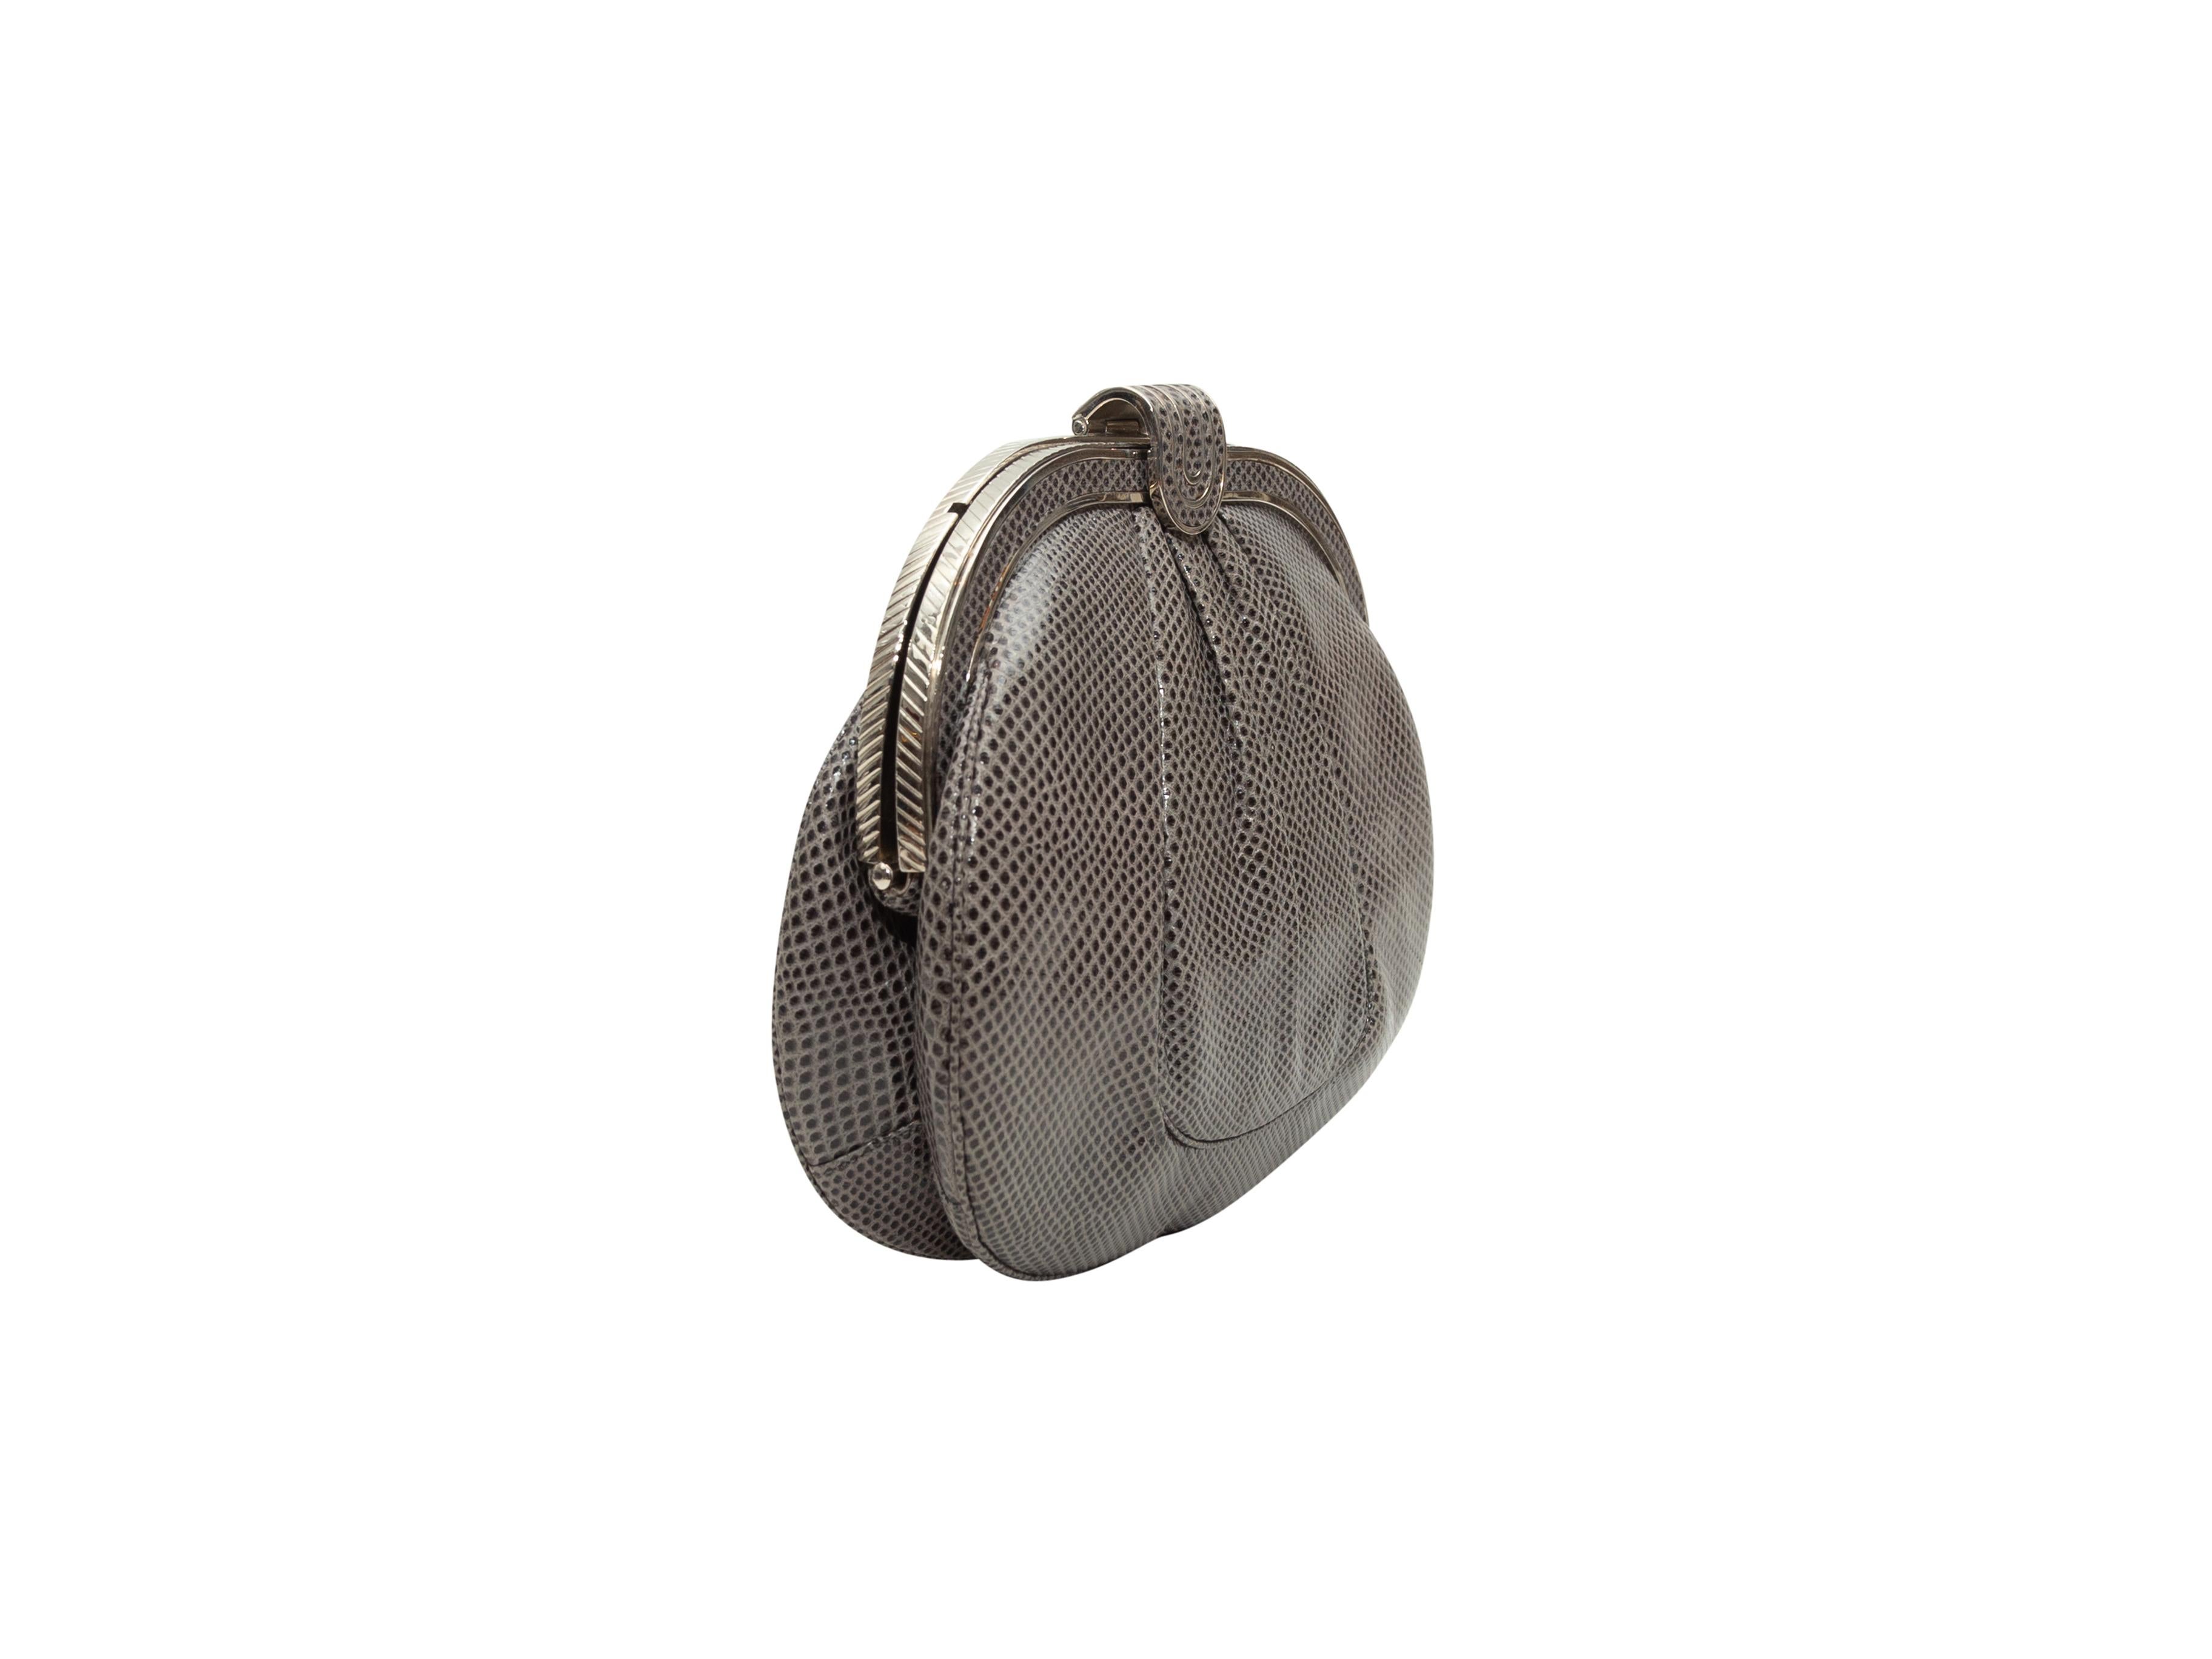 Product Details: Vintage Grey Judith Leiber Karung Clutch. This clutch features a karung skin body, silver-tone hardware, tonal satin interior, optional chain-link shoulder strap, and a top clasp closure. 7